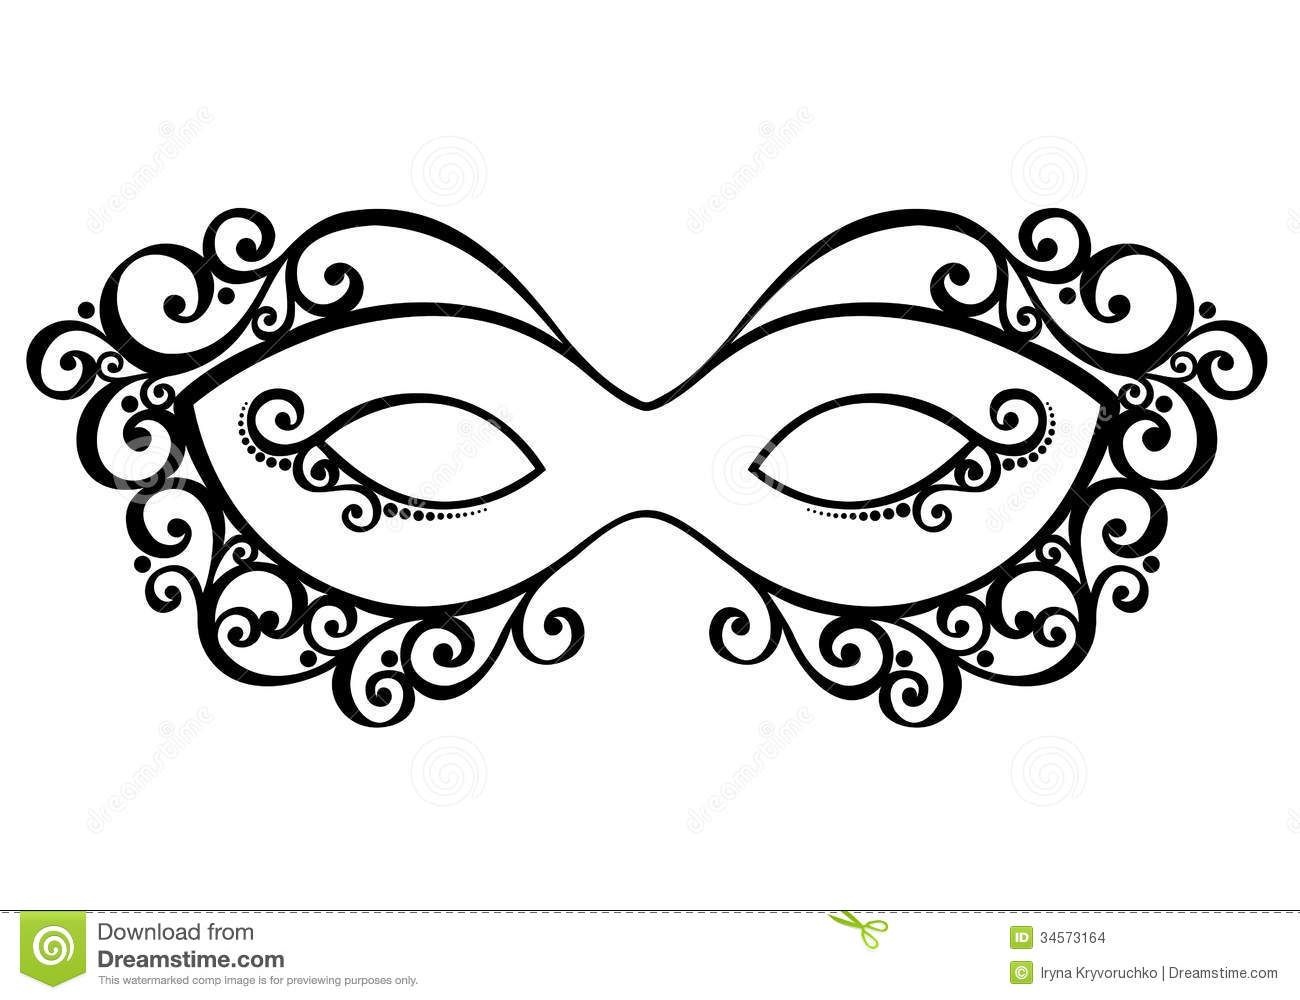 Masquerade Mask - Download From Over 30 Million High Quality Stock - Free Printable Masquerade Masks